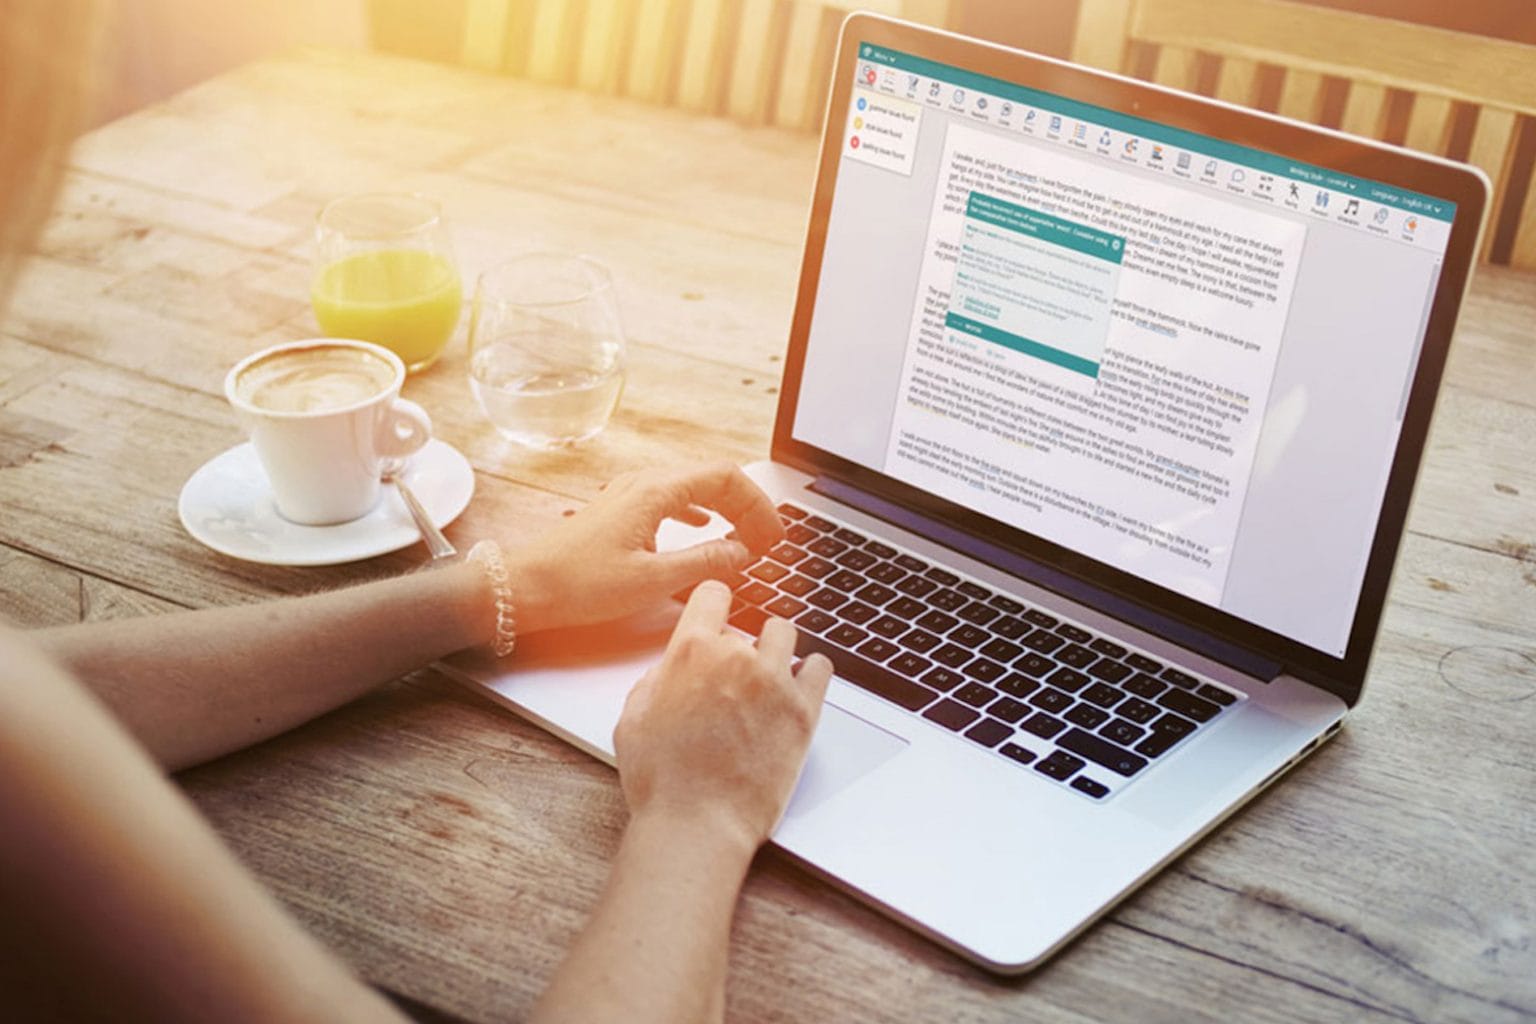 Learn how to spellcheck, write and improve with this lifetime ProWritingAid bundle